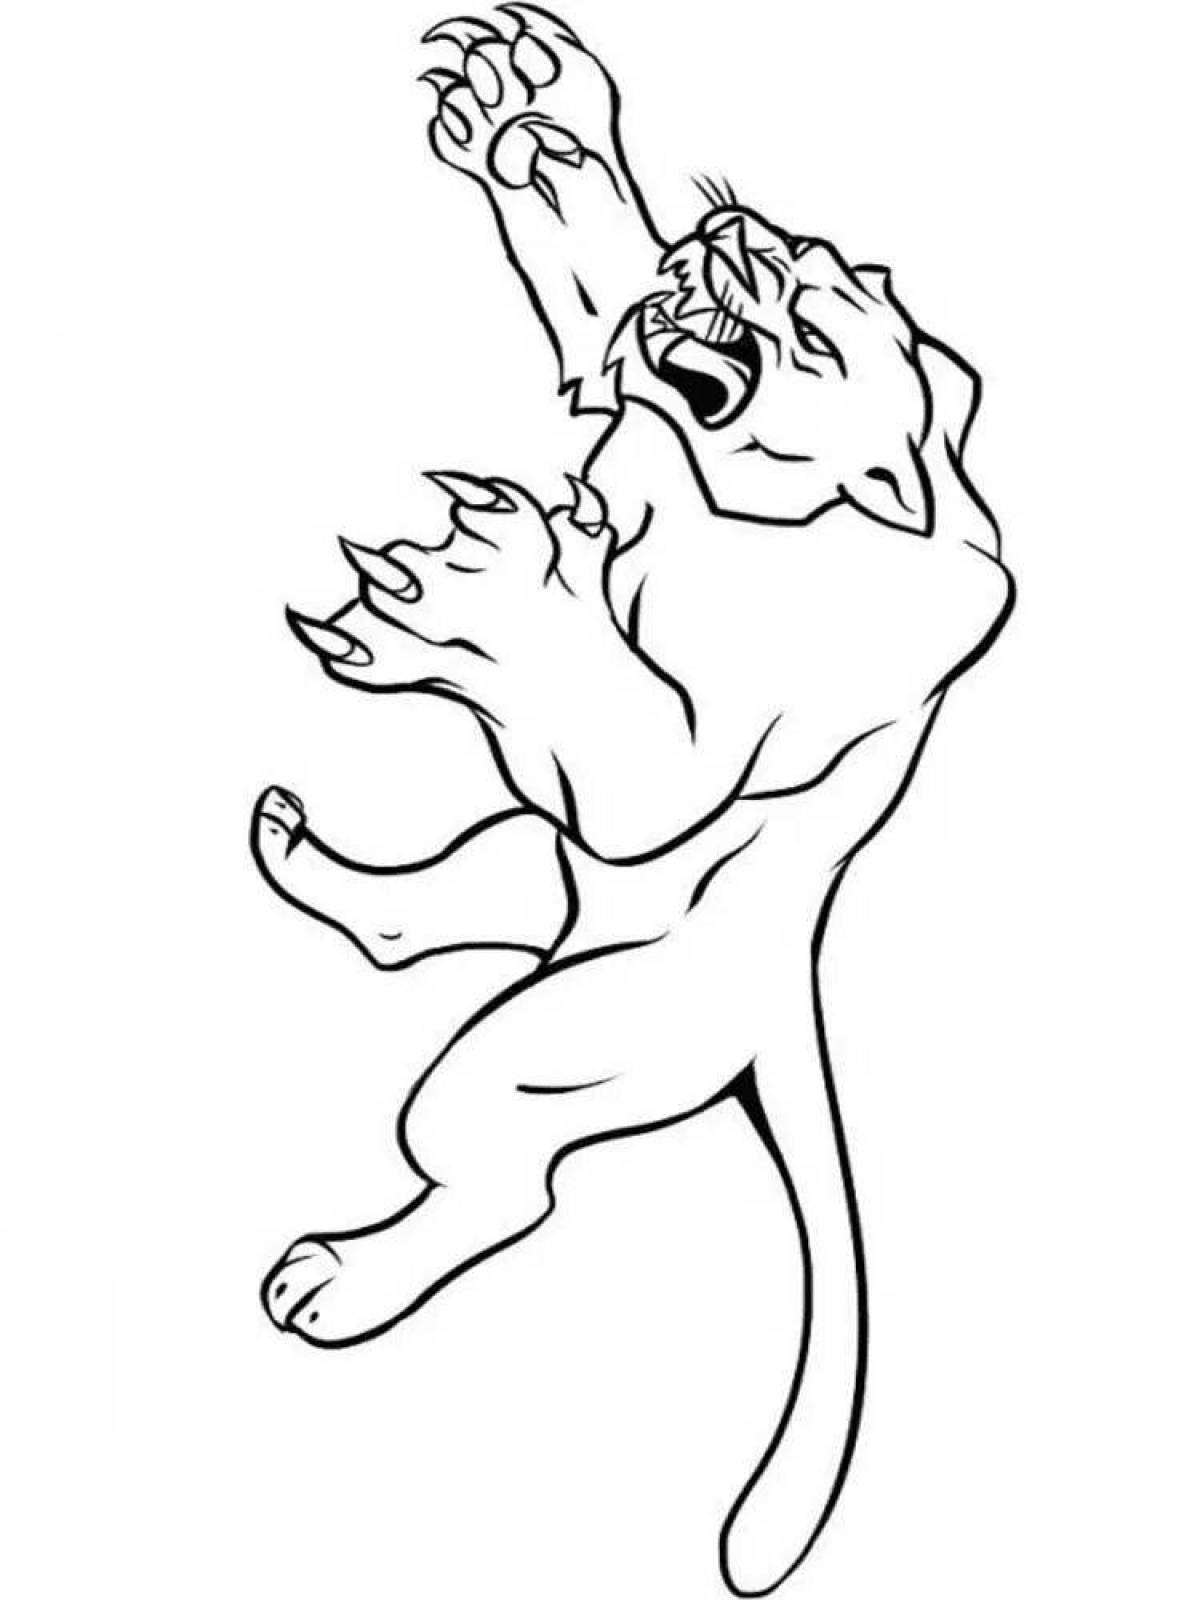 Dazzling panther coloring page